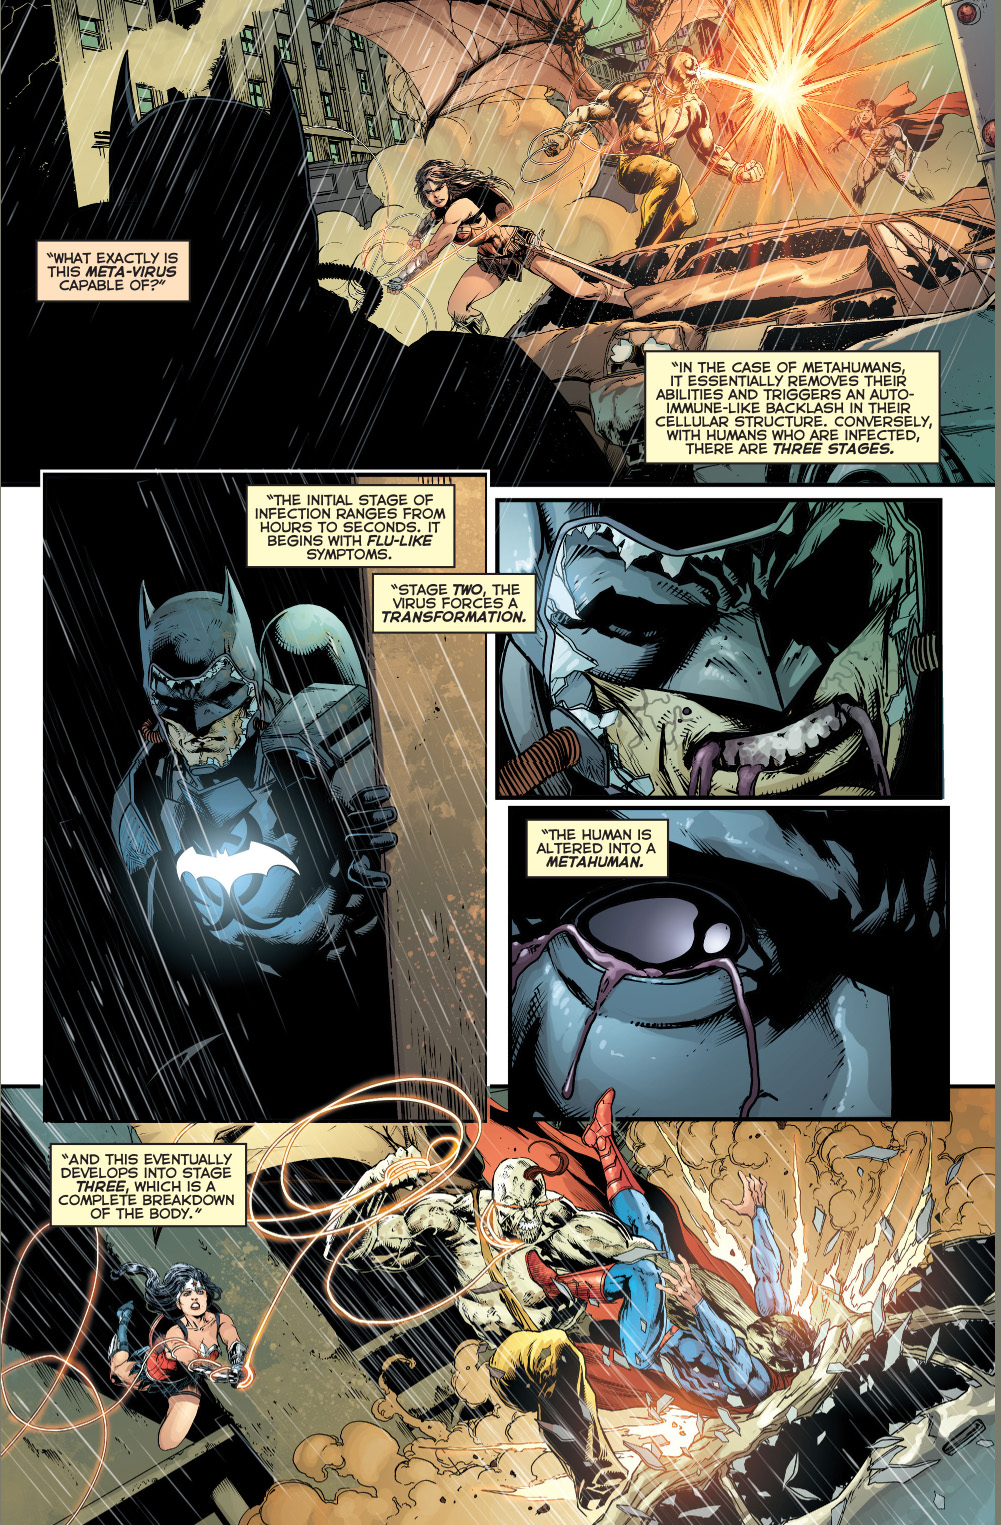 batman is infected with the amazo virus